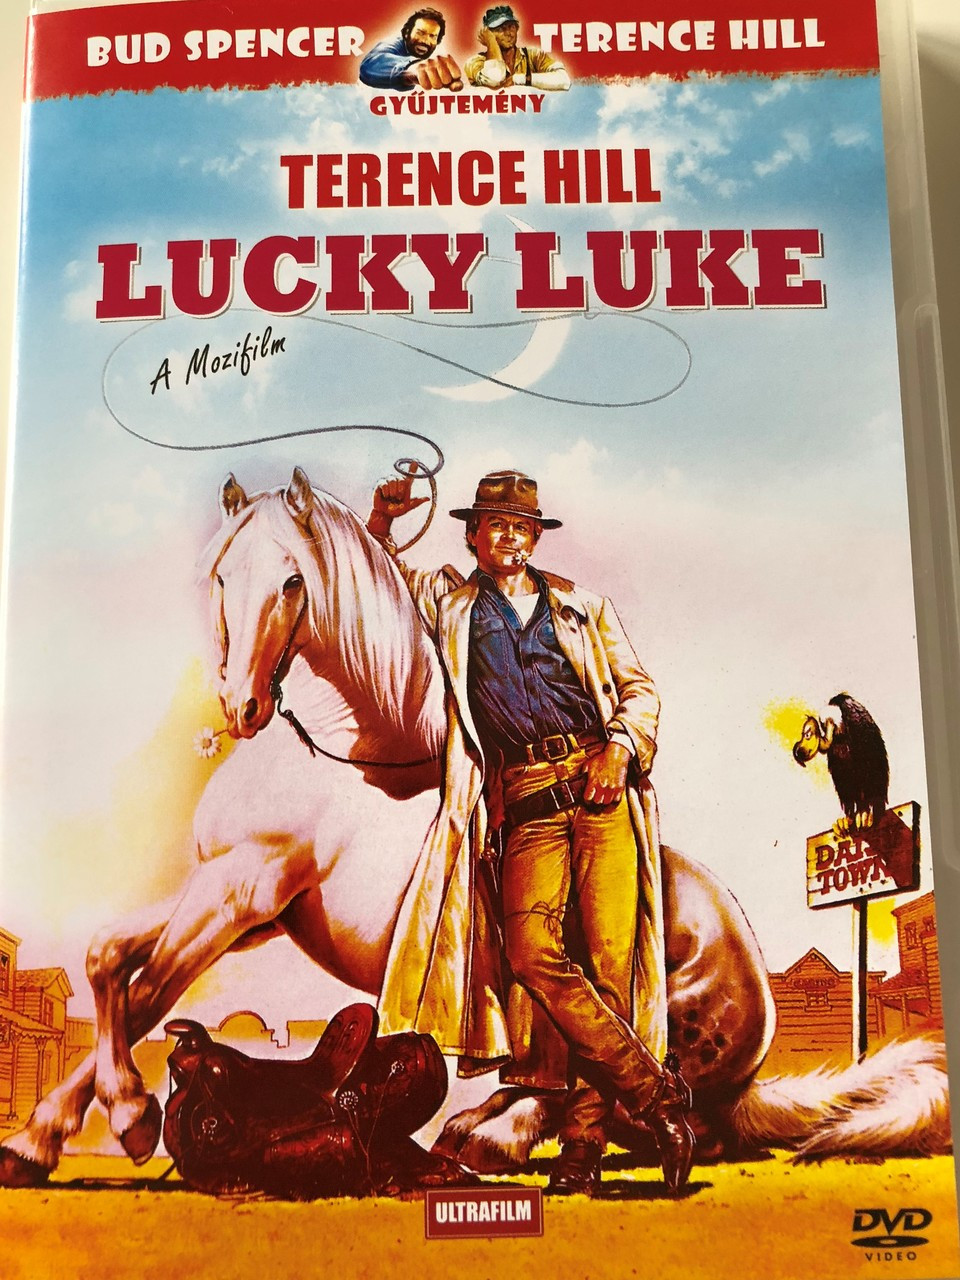 Lucky Luke DVD 1991 / Audio: English and Hungarian / Subtitle: Hungarian /  Starring: Terence Hill, Nancy Morgan, Roger Miller, Fritz Sperberg /  Directed by: Terence Hill - bibleinmylanguage